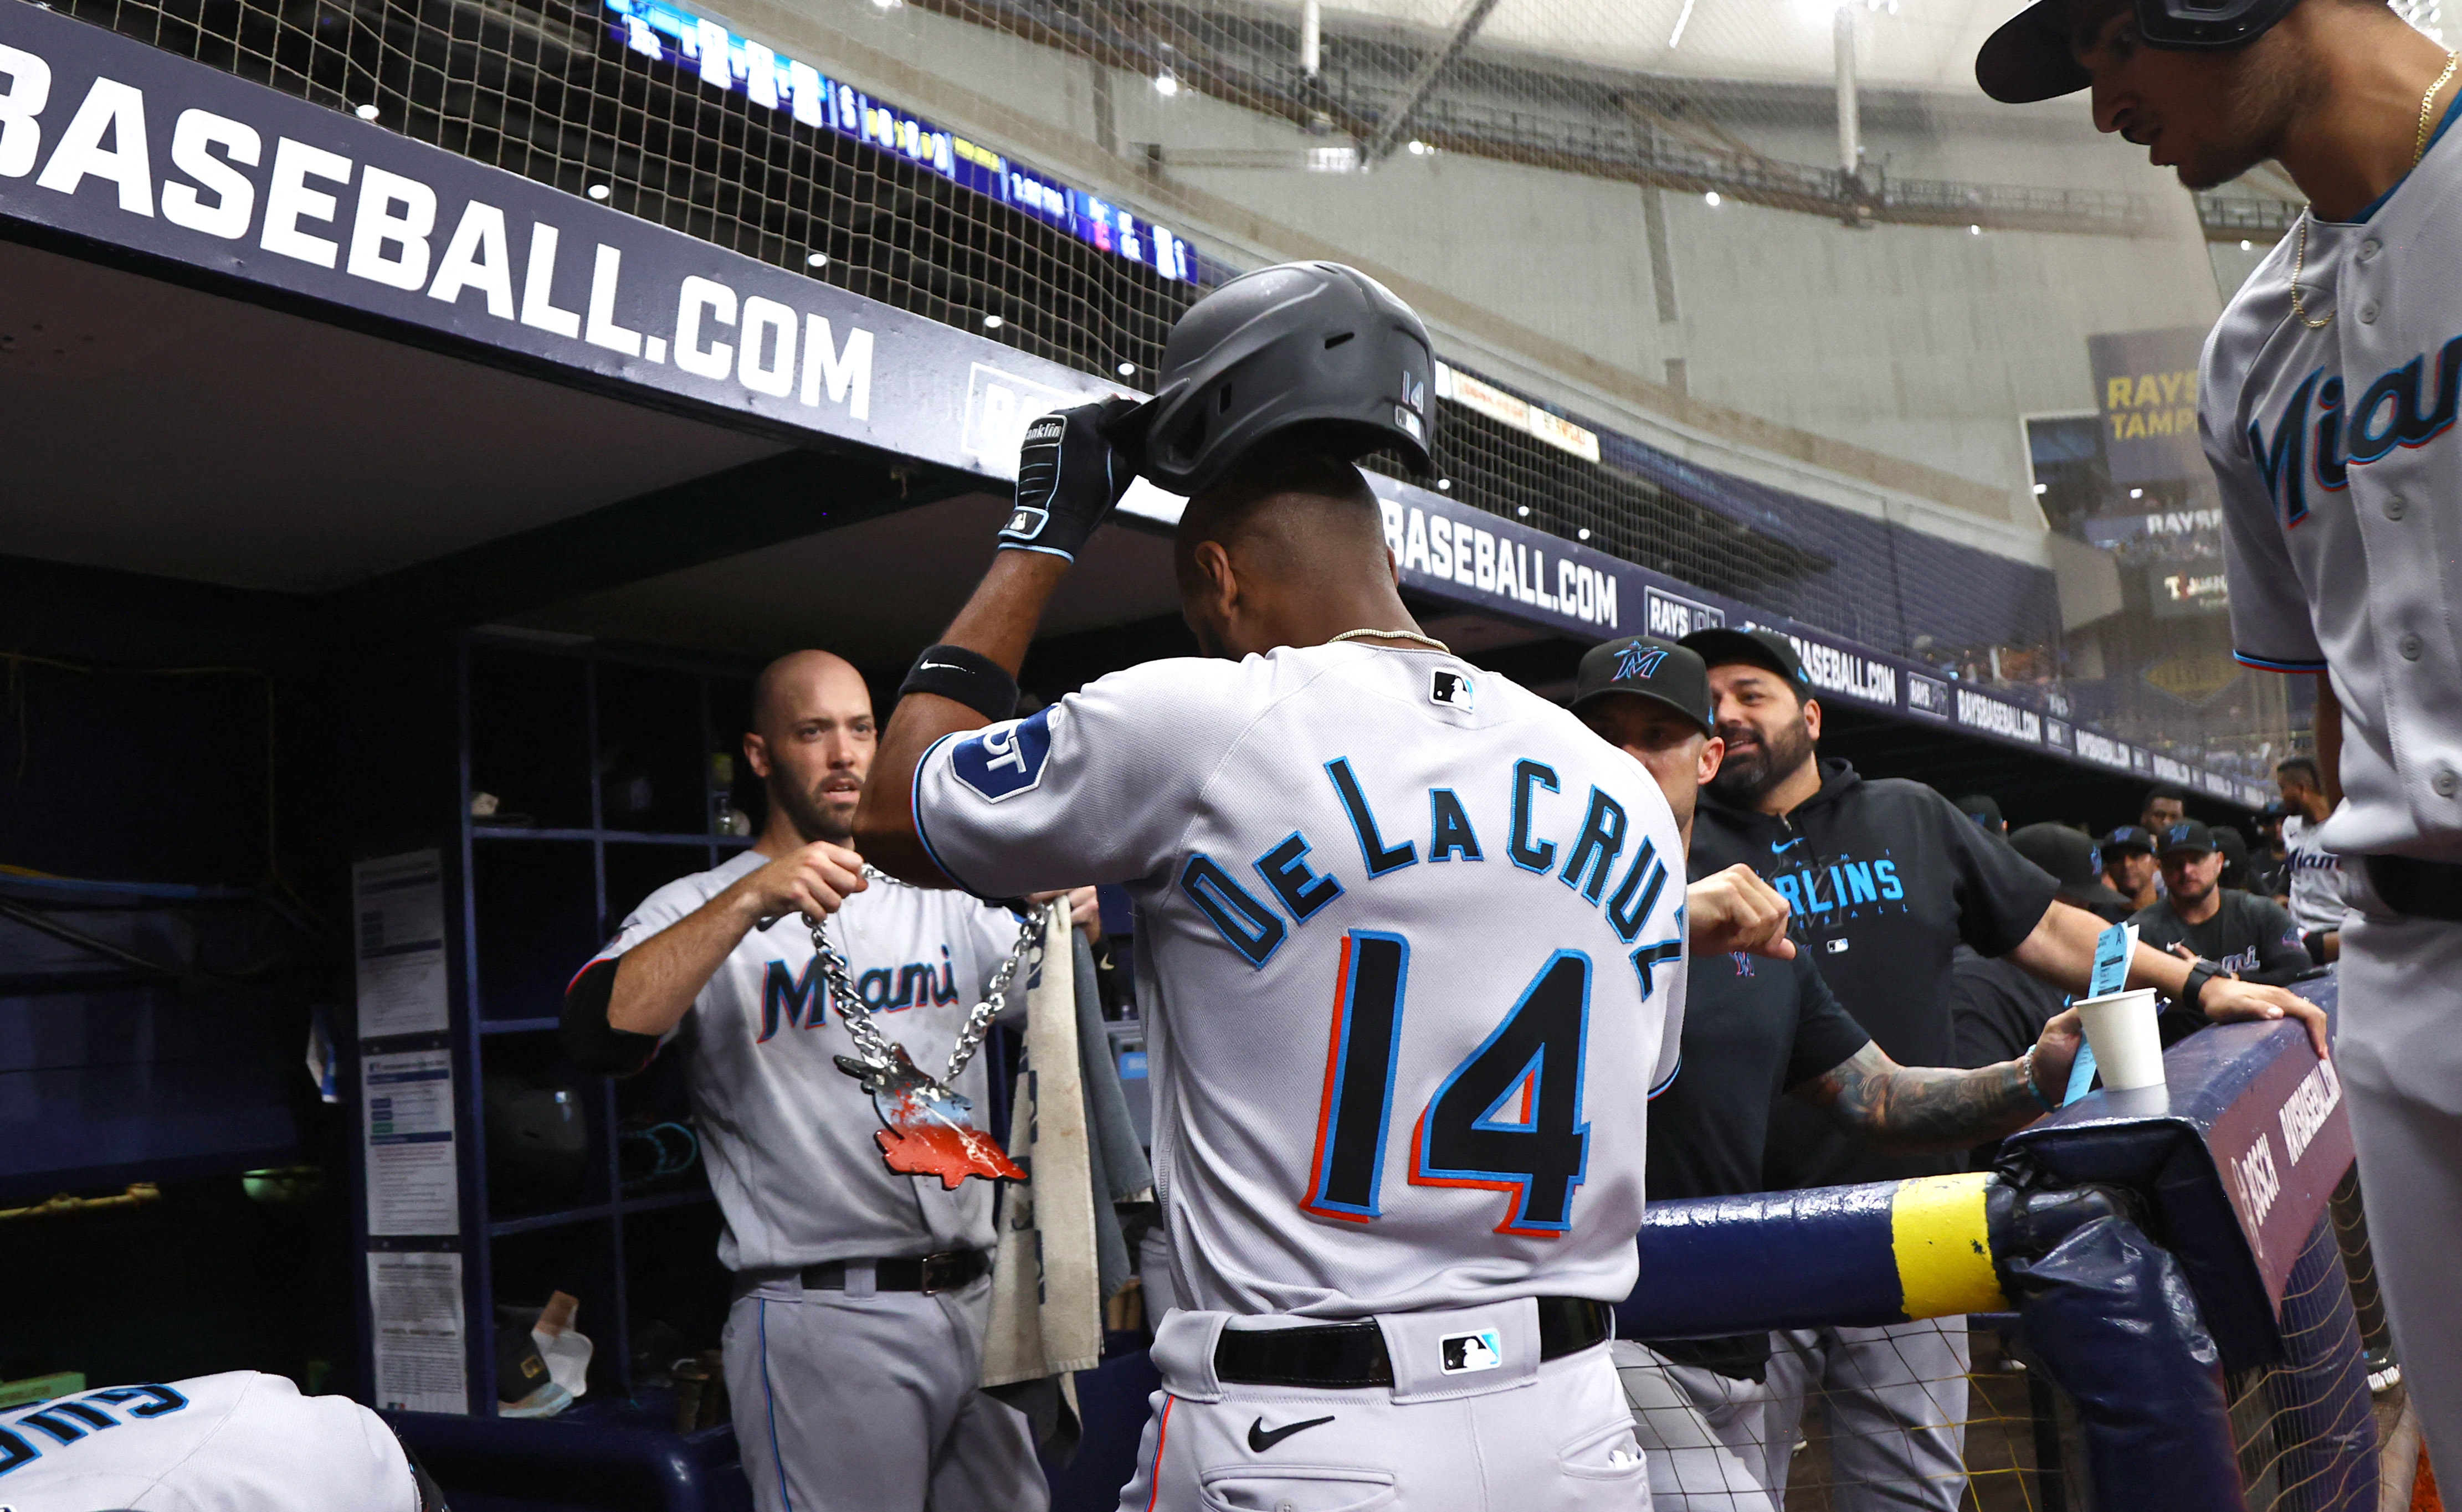 Sandy Alcantara tosses complete game, fuels Marlins past Rays